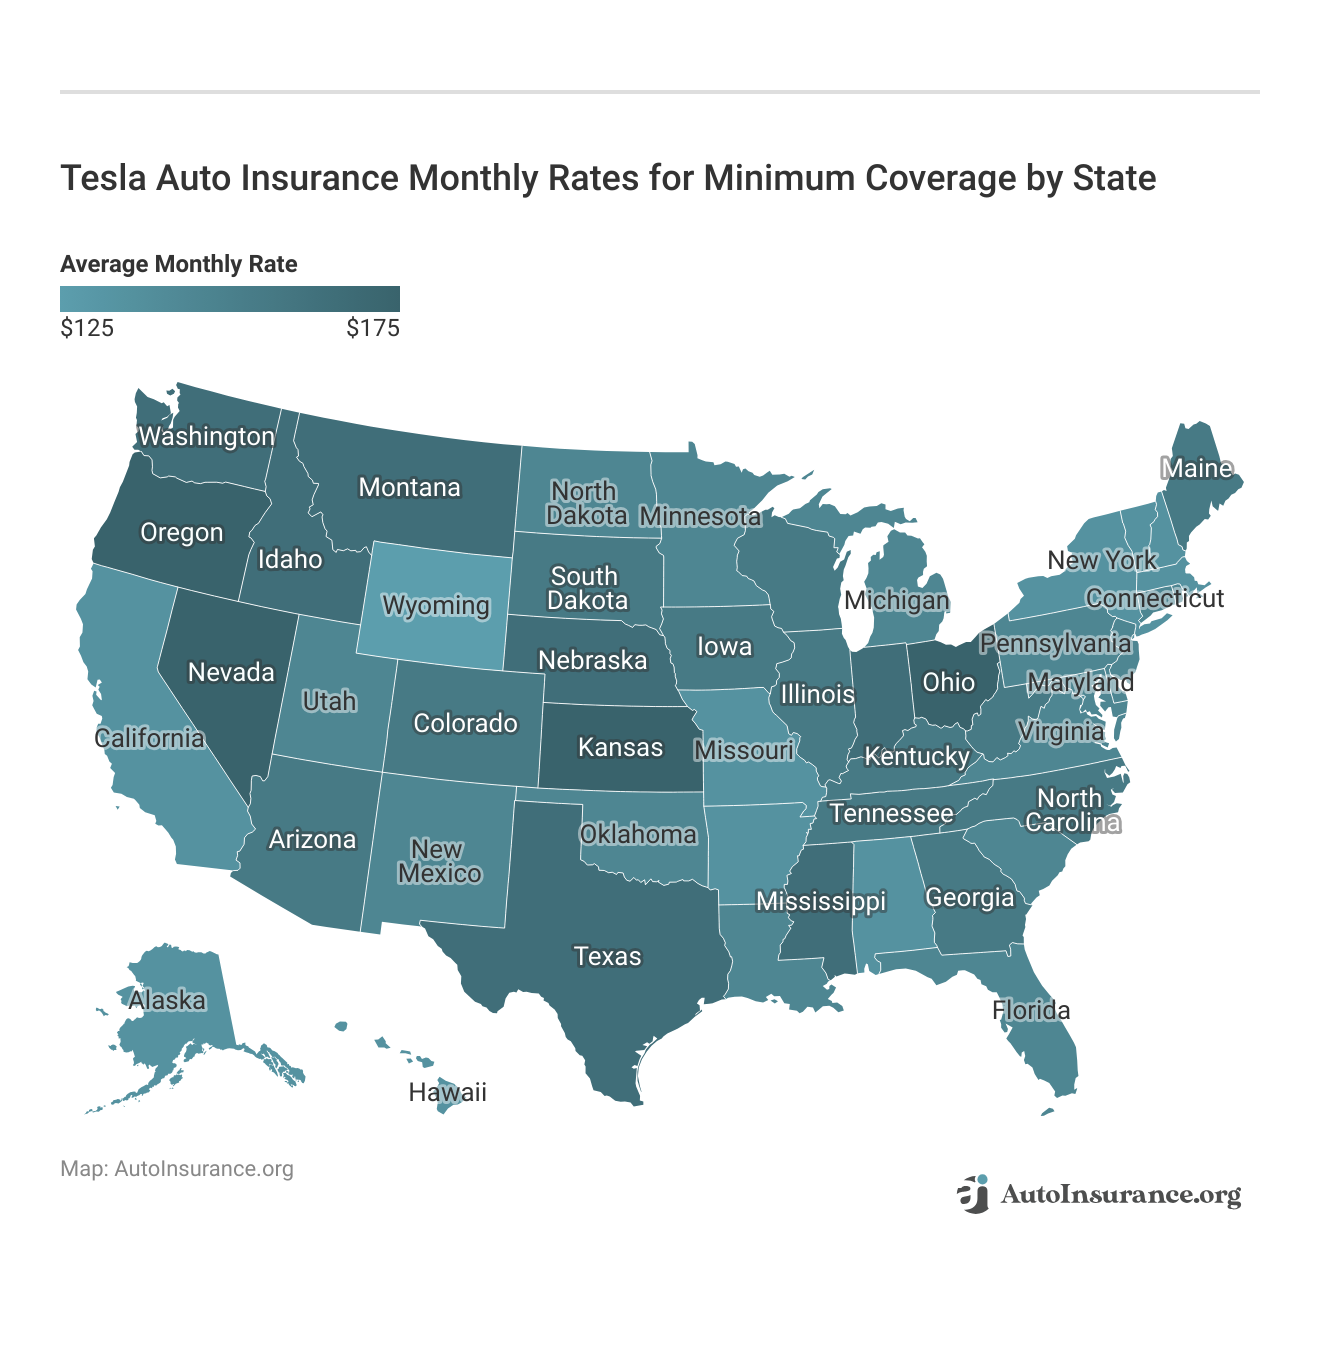 <h3>Tesla Auto Insurance Monthly Rates for Minimum Coverage by State</h3>